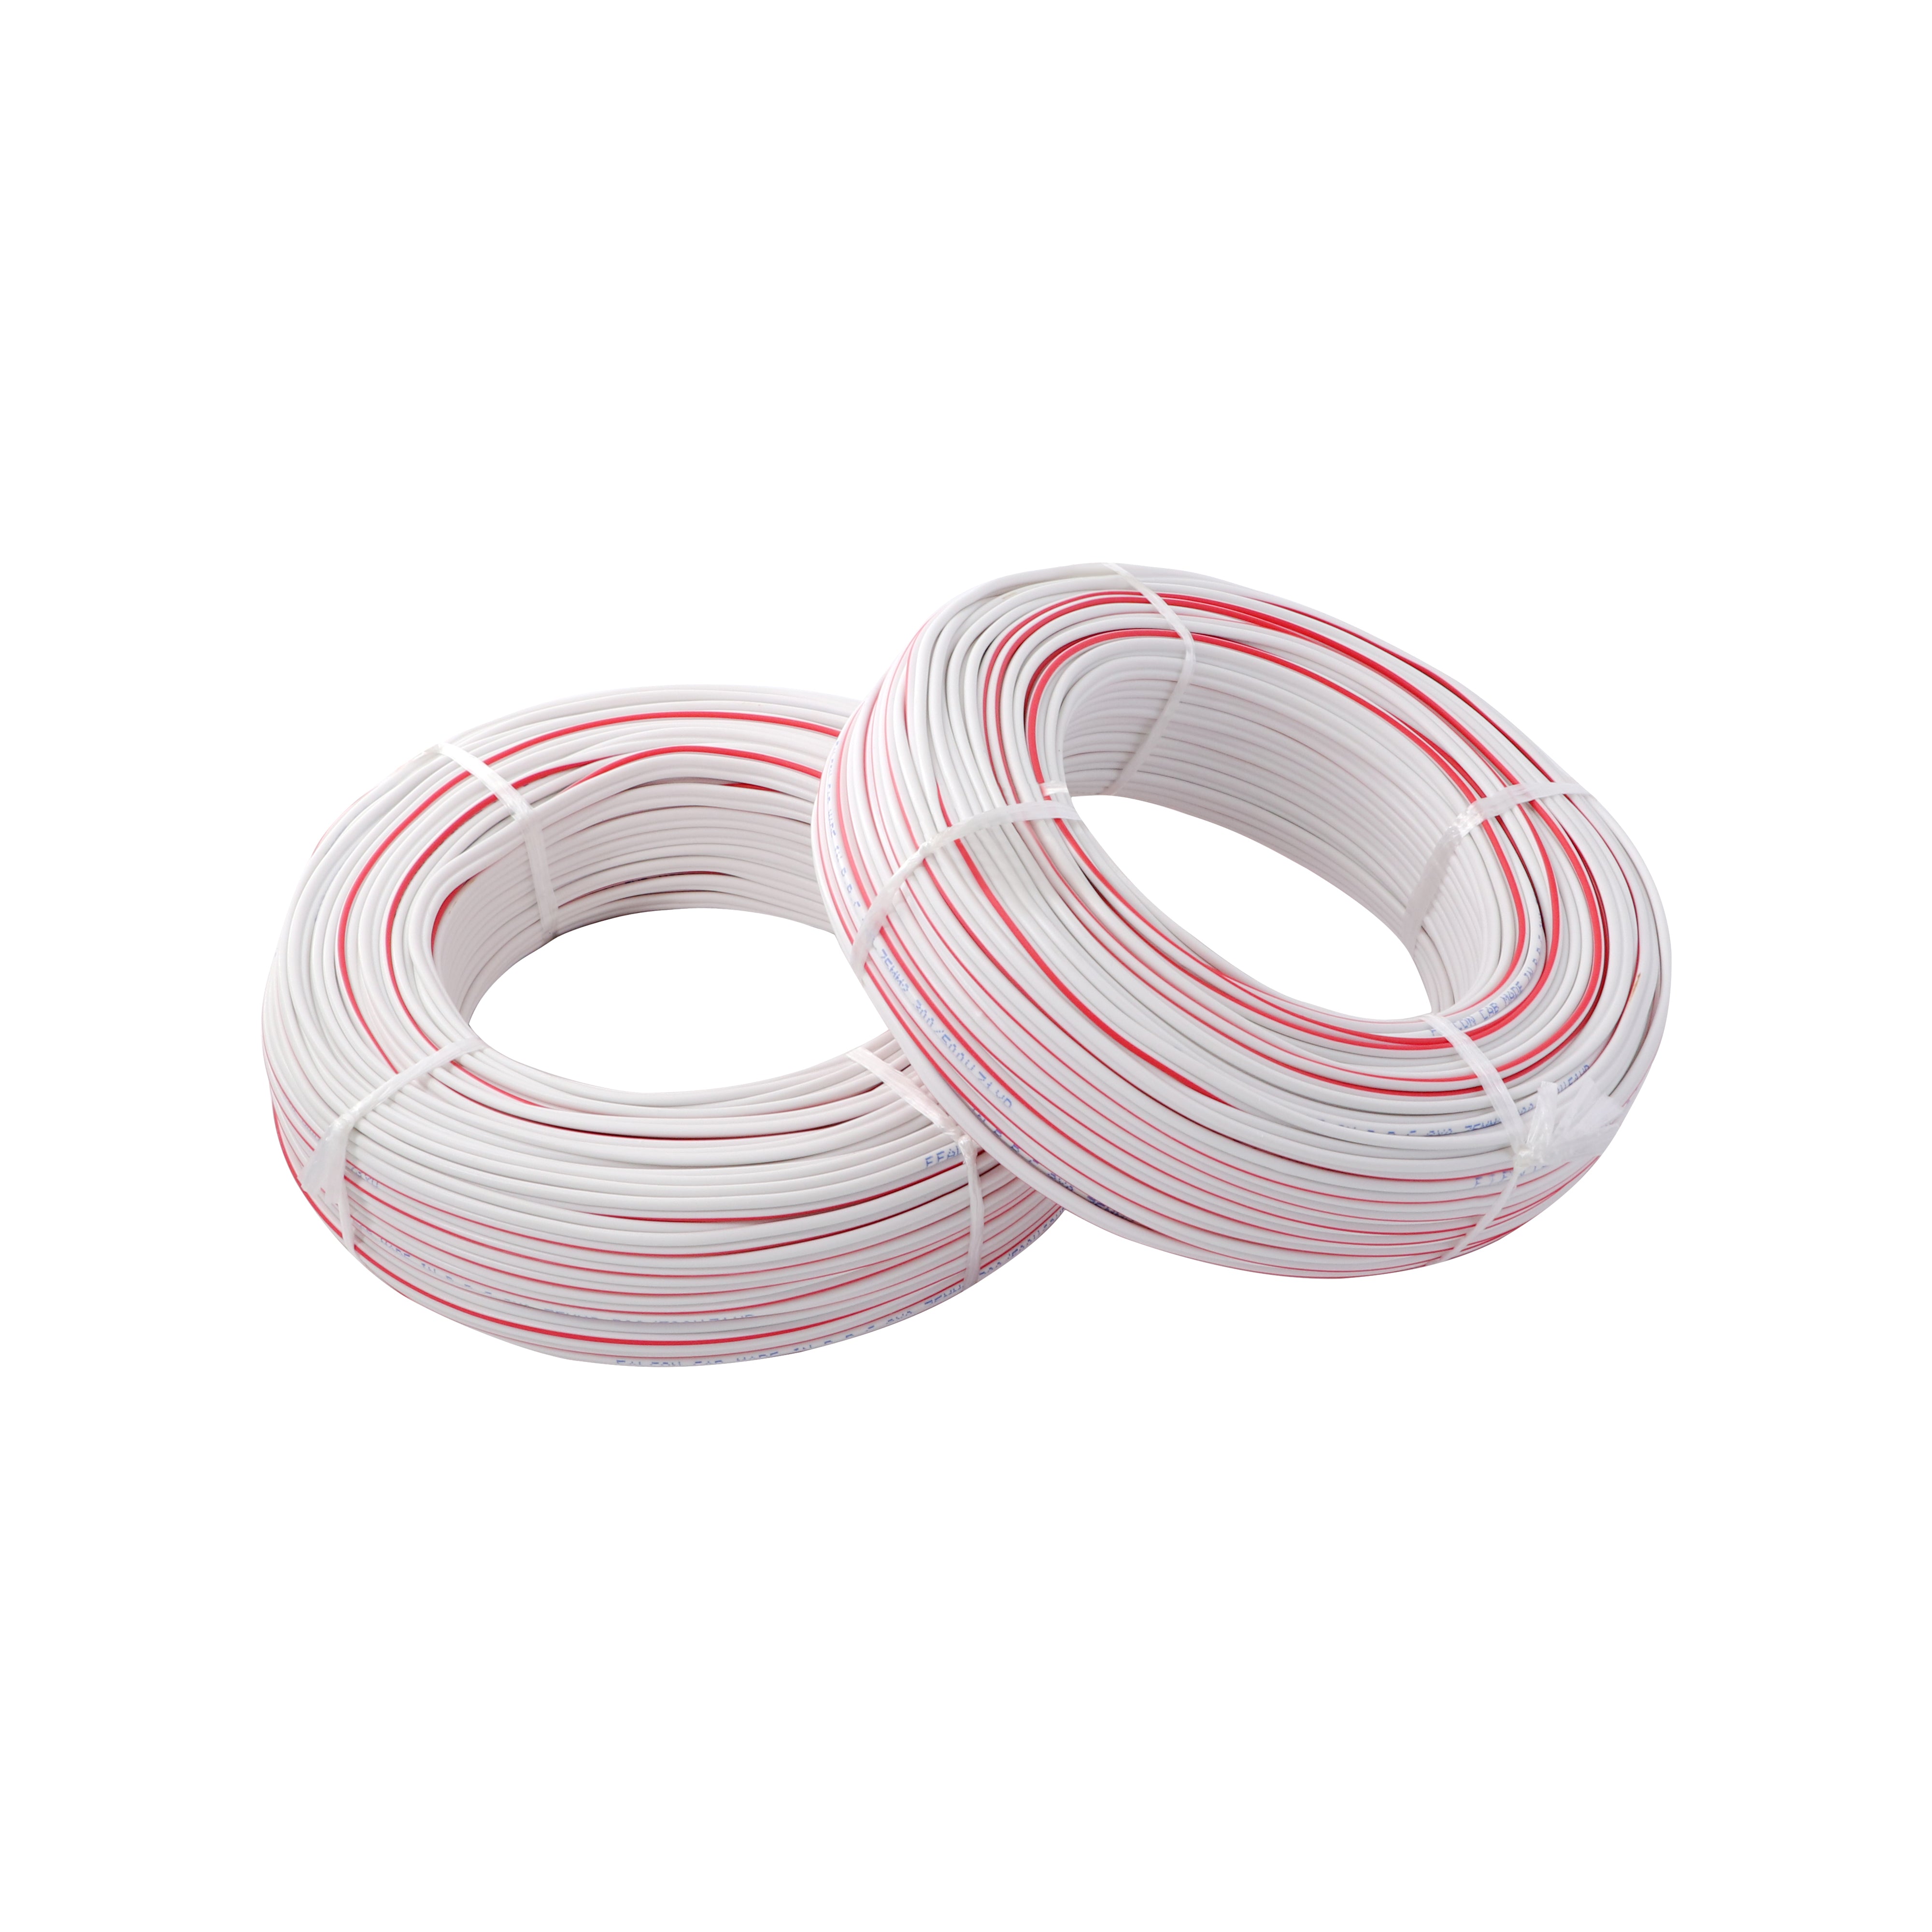 ZR-RVB  white and red wire-double wire